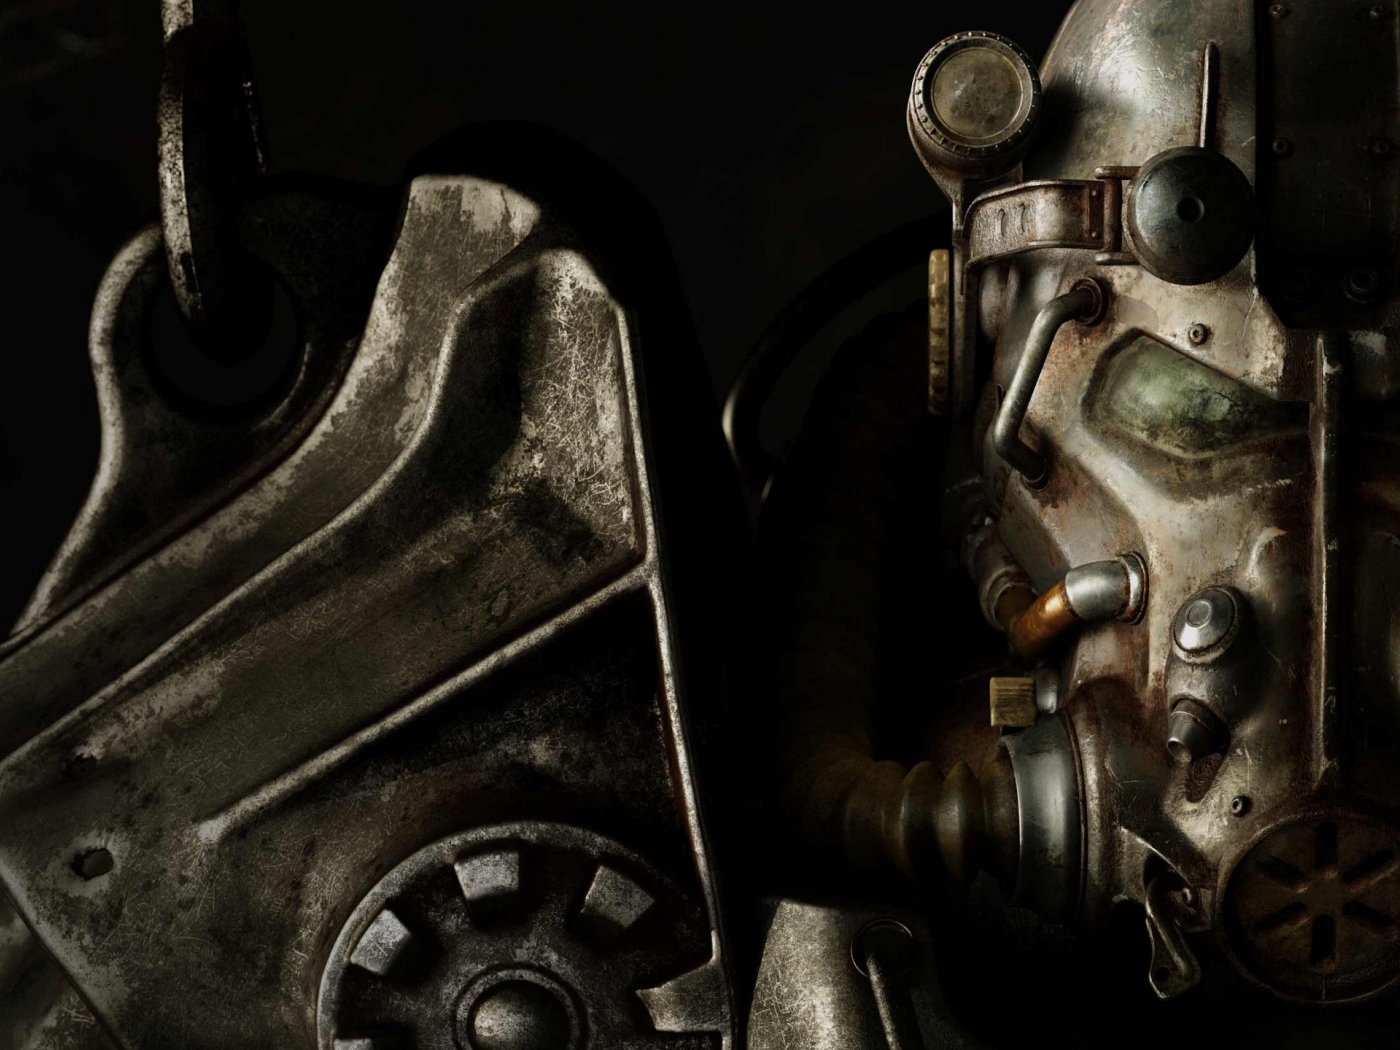 A powerful armor character in the game Fallout 4